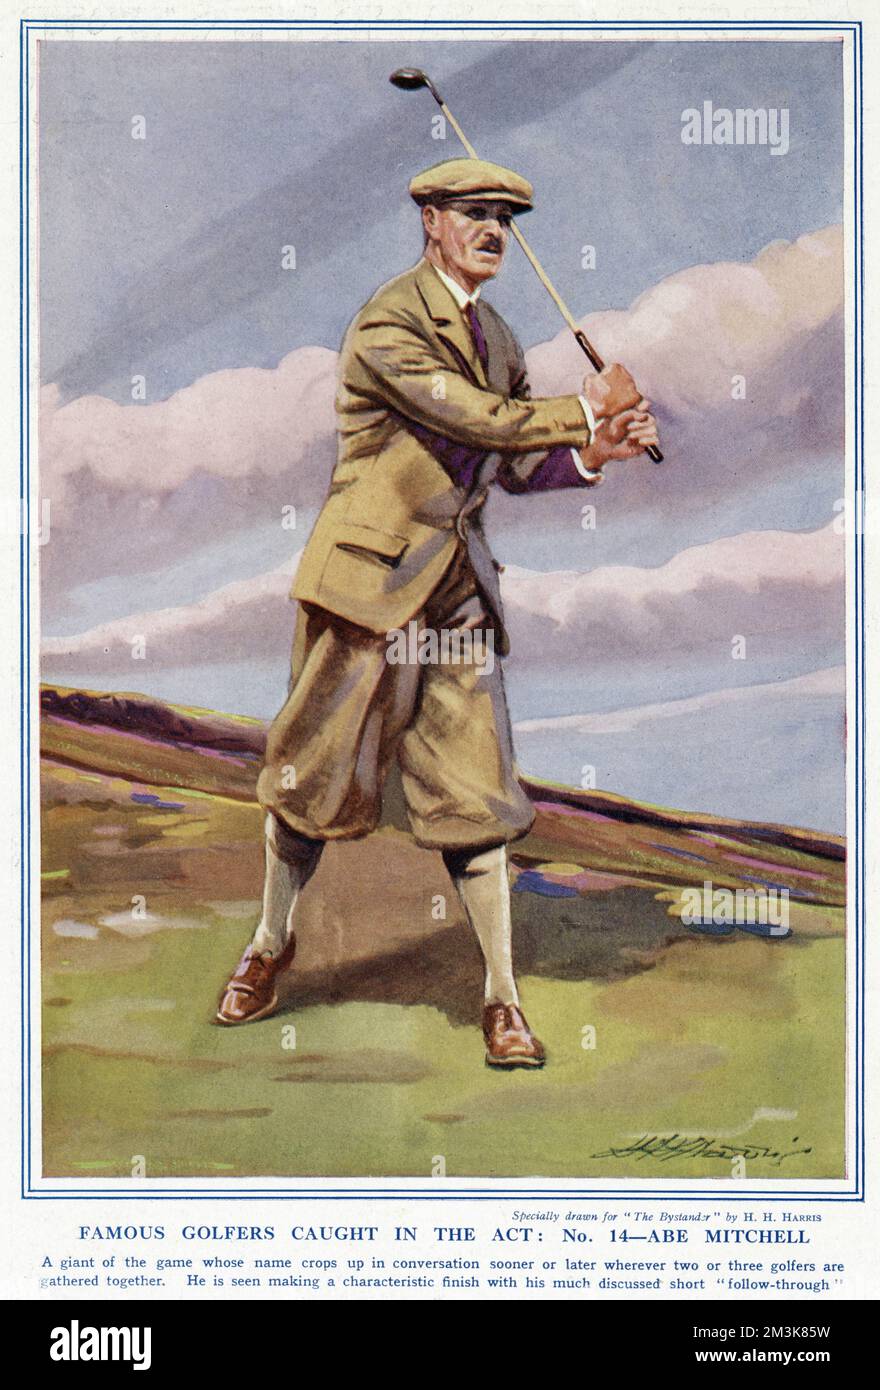 A giant of the game whose name crops up in conversation sooner or later wherever two or three golfers are gathered together. He is seen making a characteristic finish with his much discussed short follow through.     Date: 1928 Stock Photo